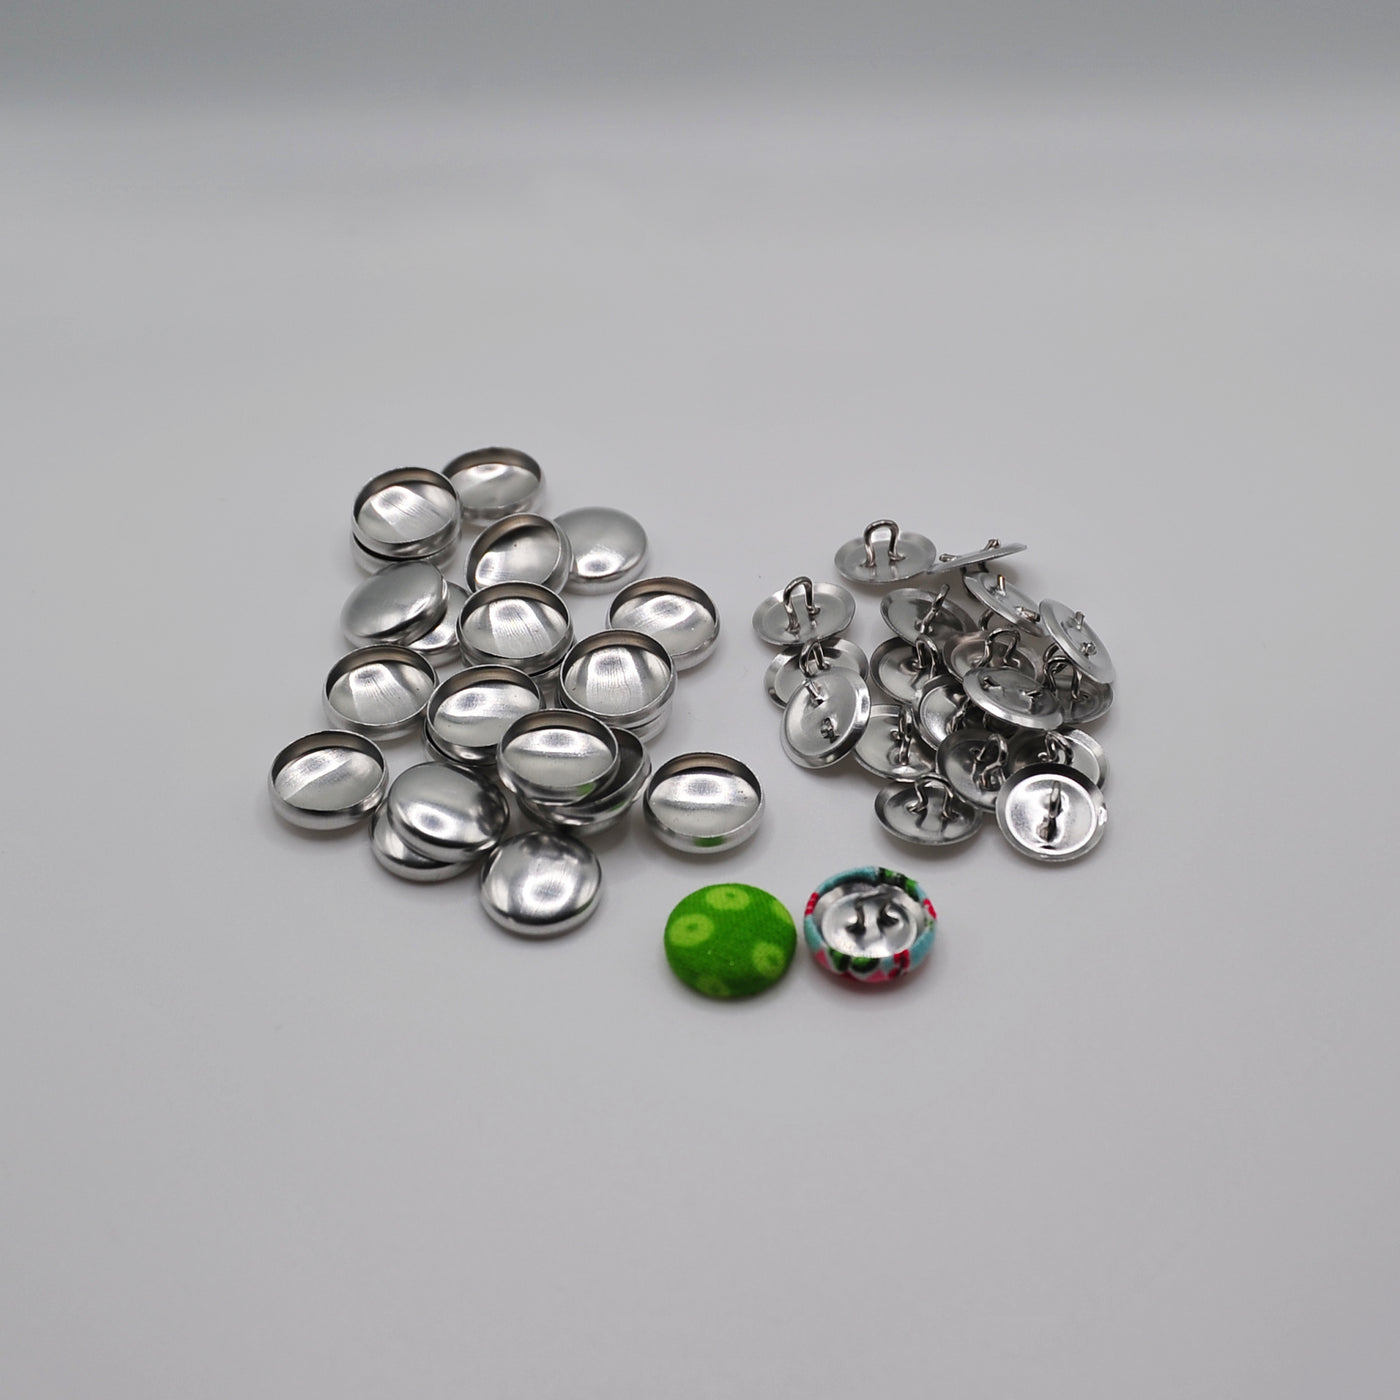 15mm (5/8 Inch) (Size 24 US) Self Cover Buttons